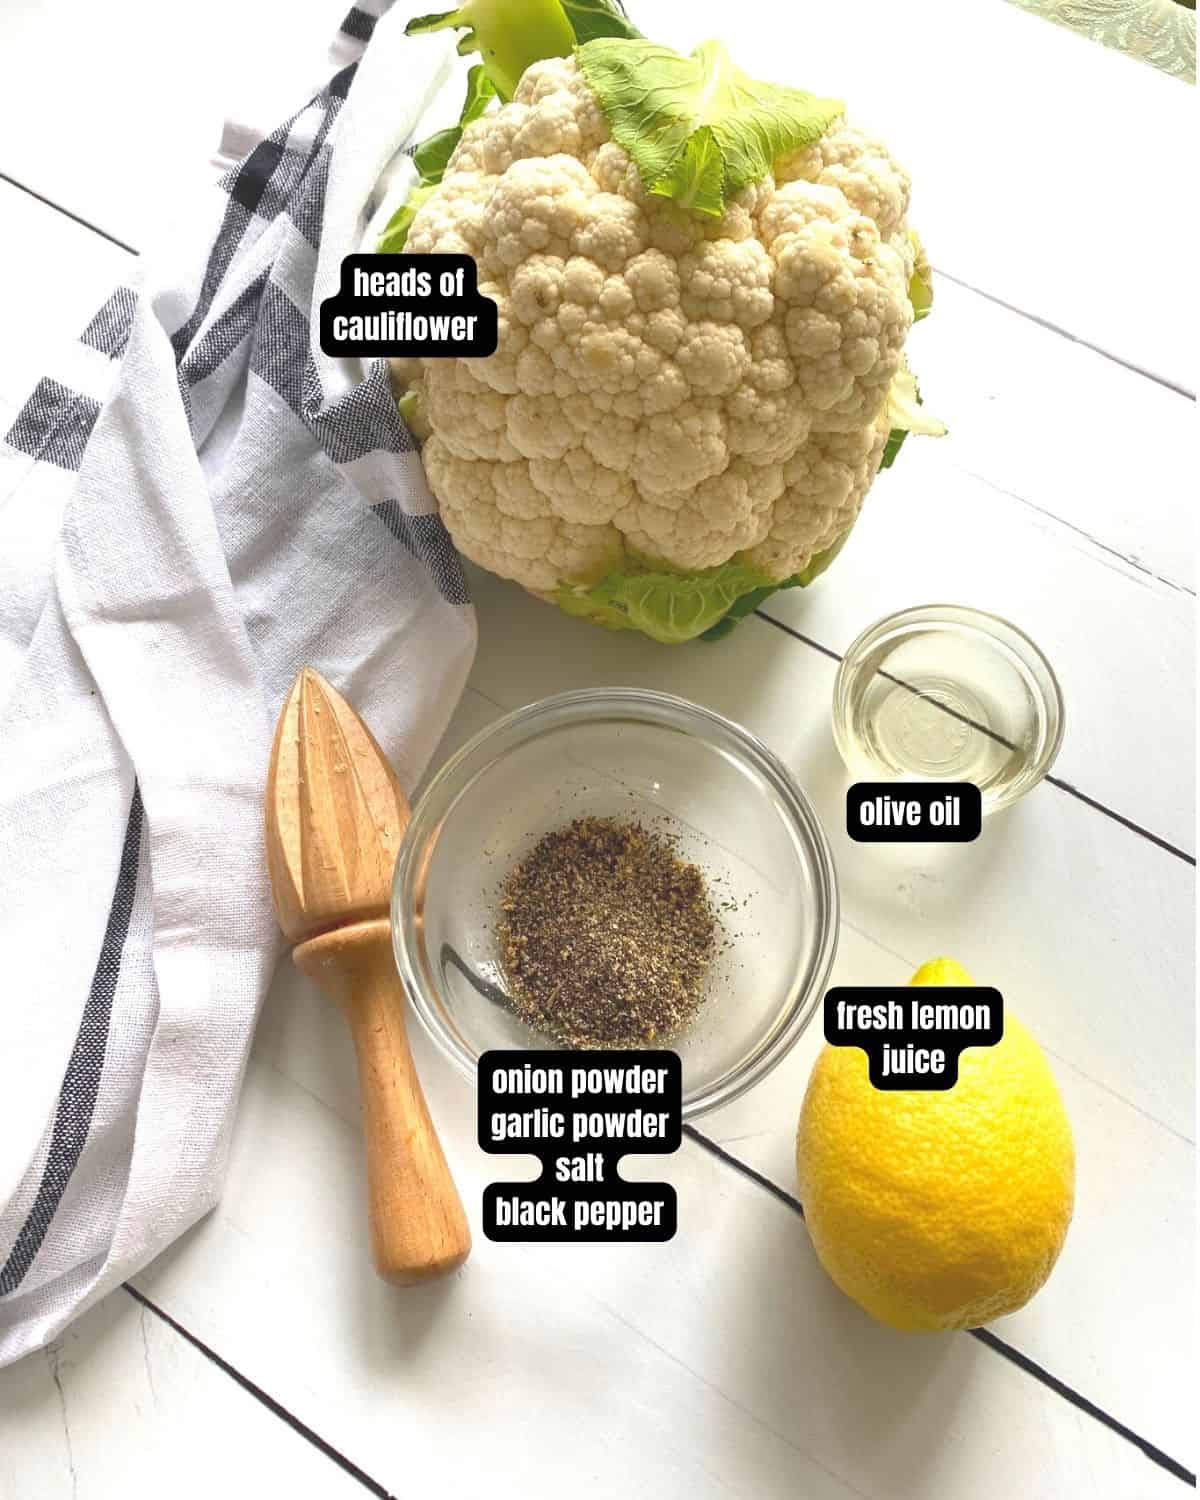 Ingredients to make cauliflower steaks on the grill.